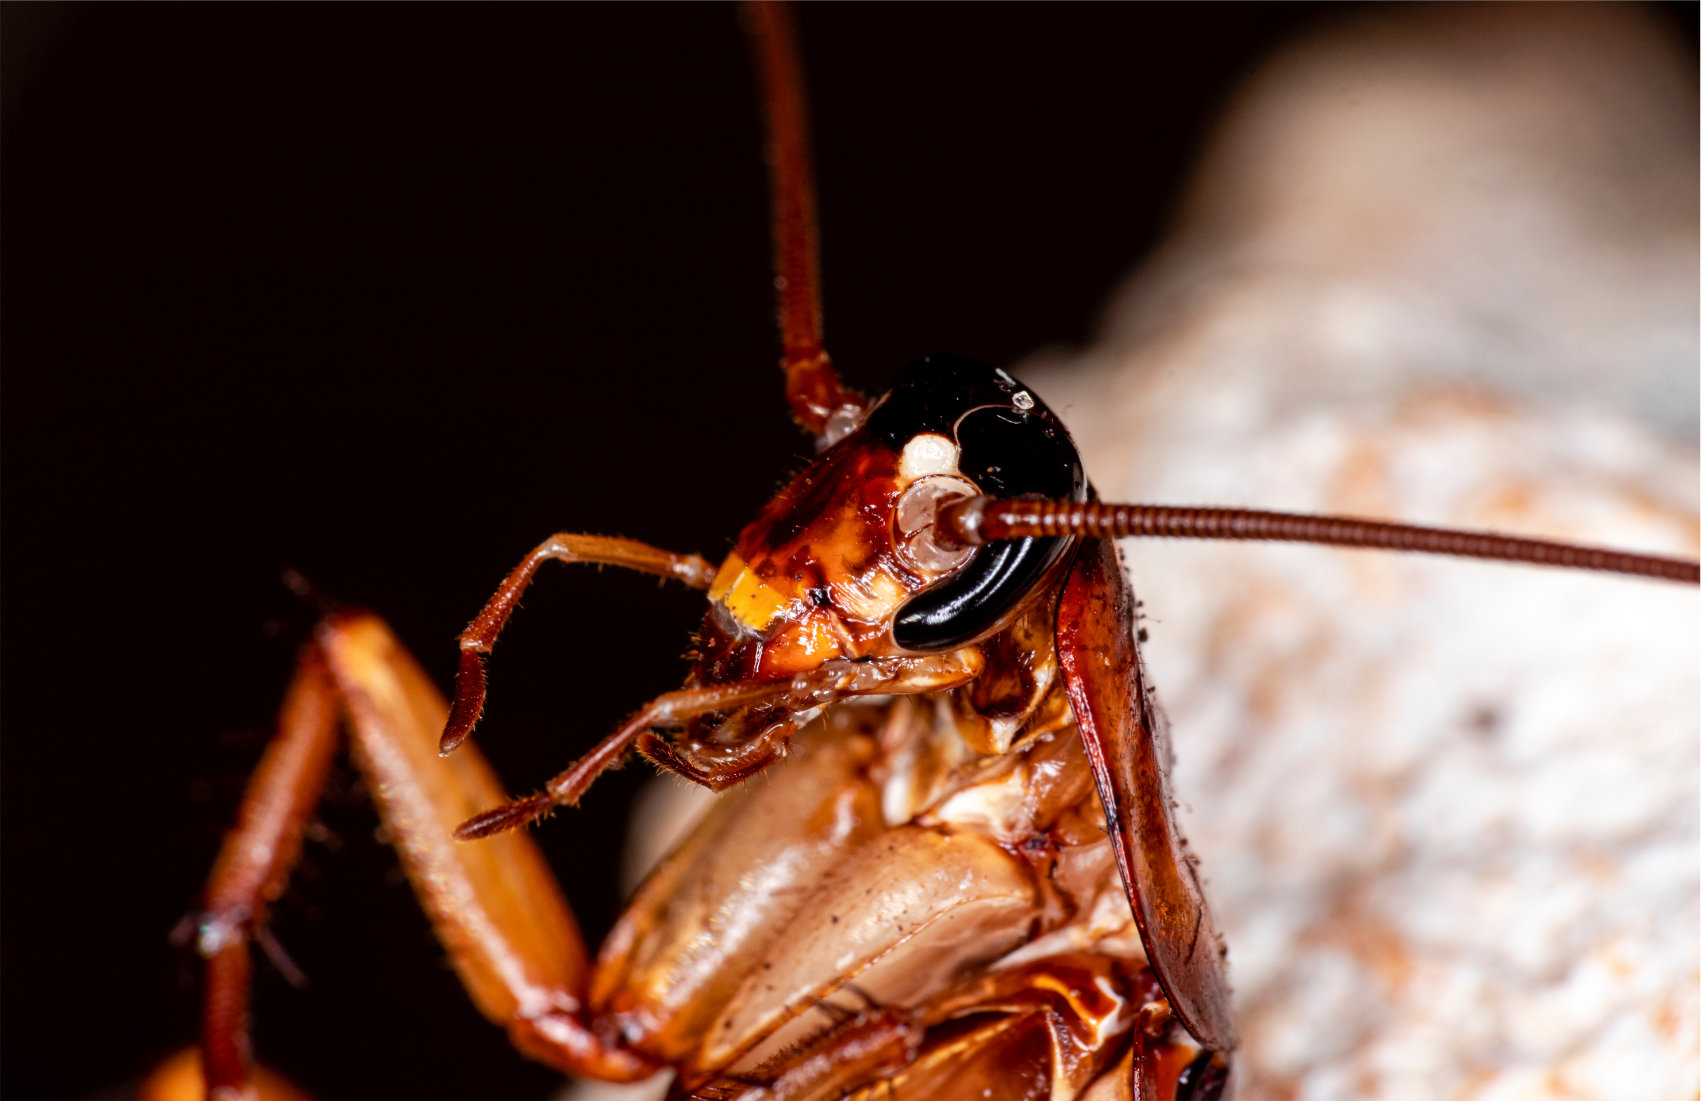 An ugly cockroach mouth closeup